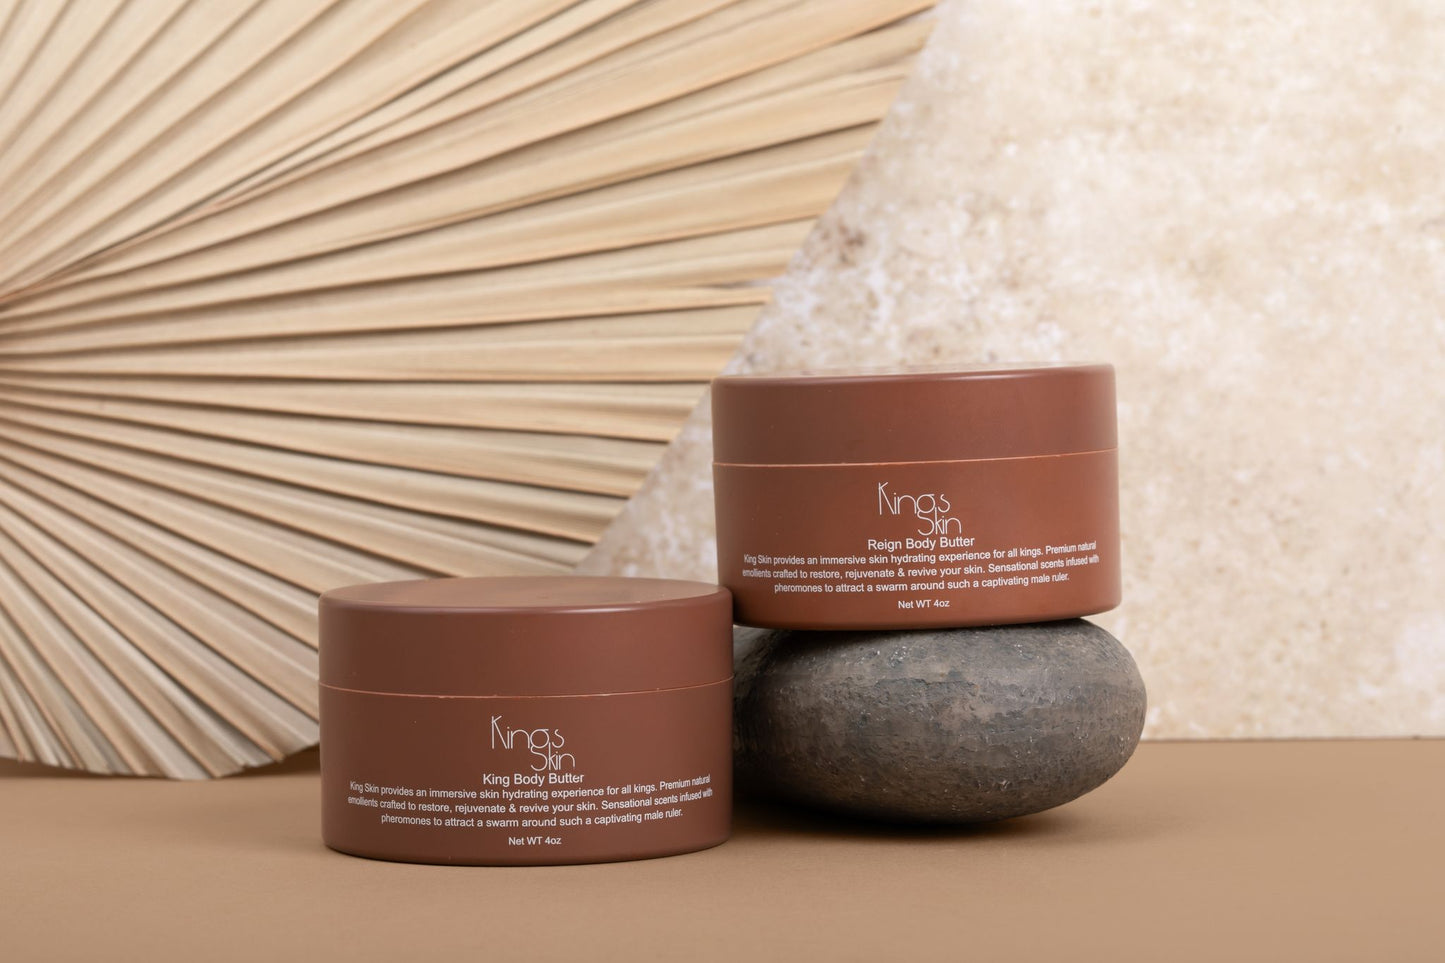 Reign and King Body Butter Bundle